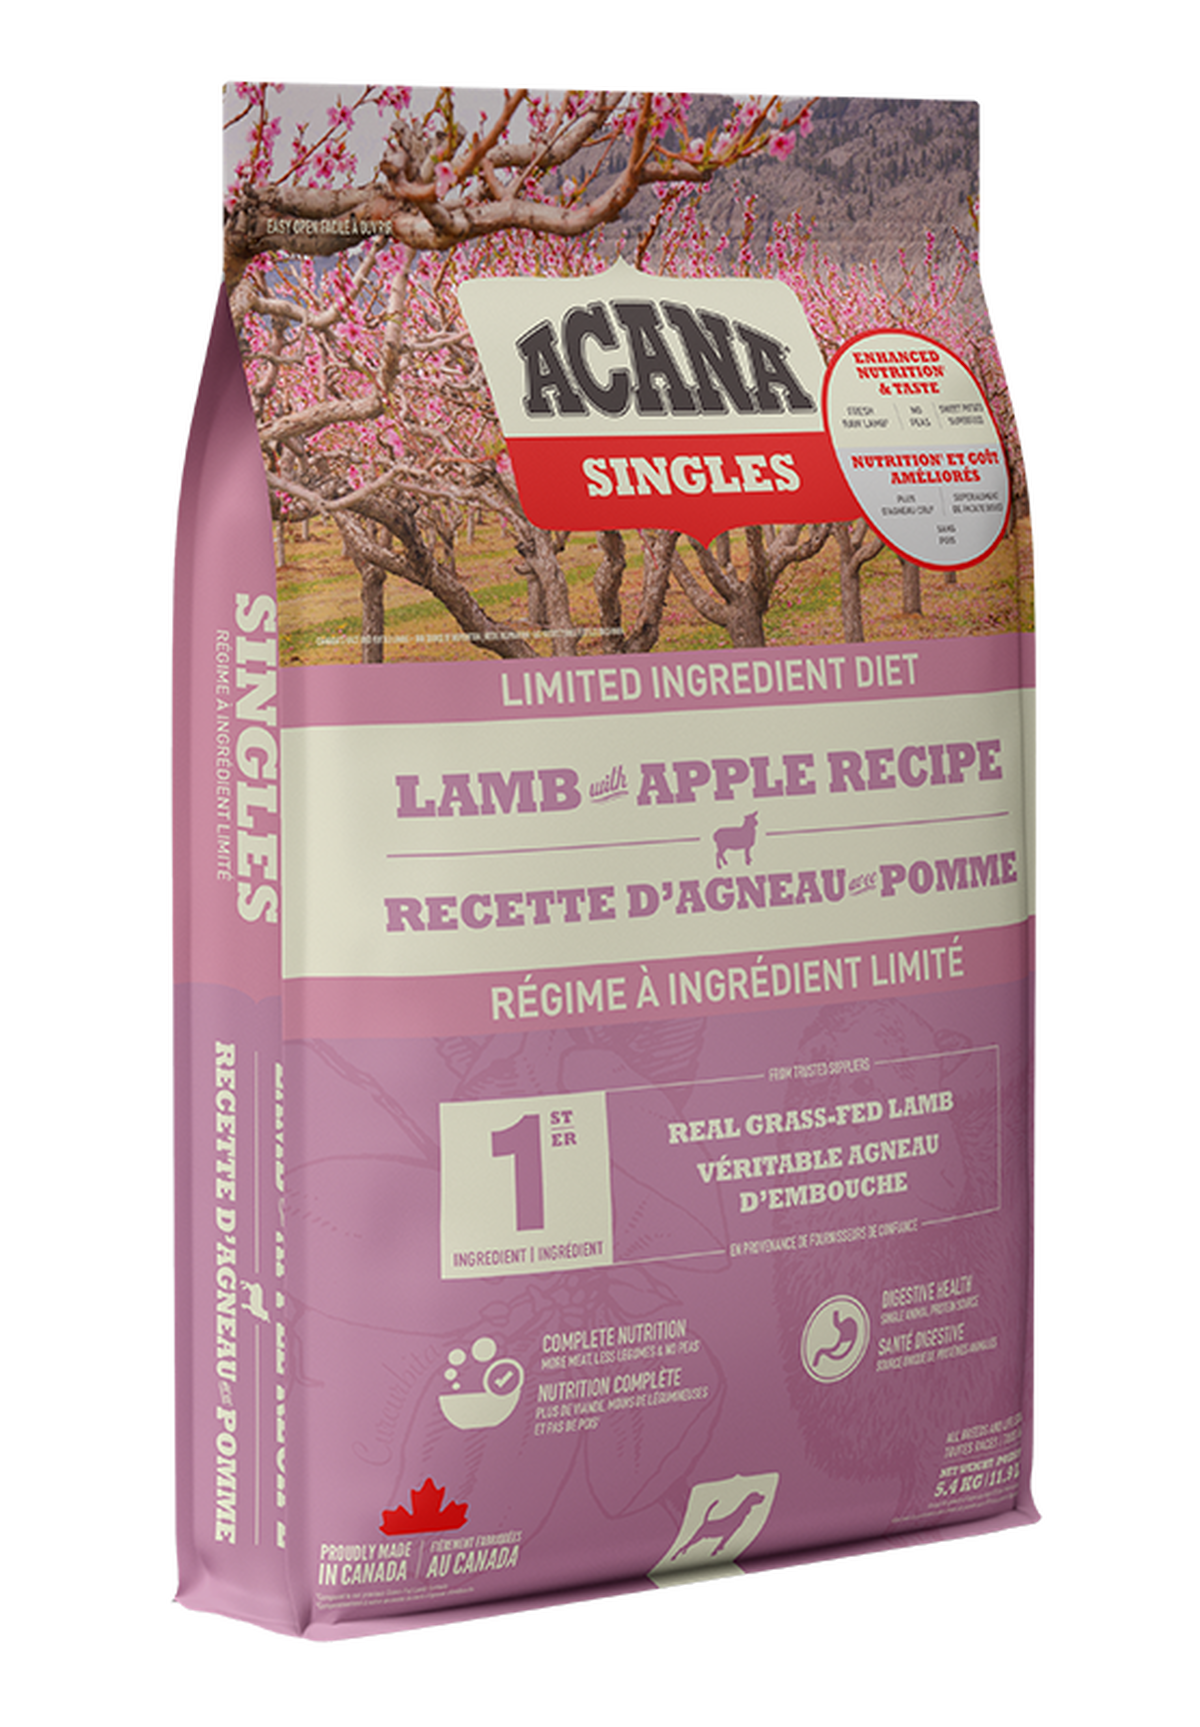 Acana Grass-Fed Lamb for Dogs